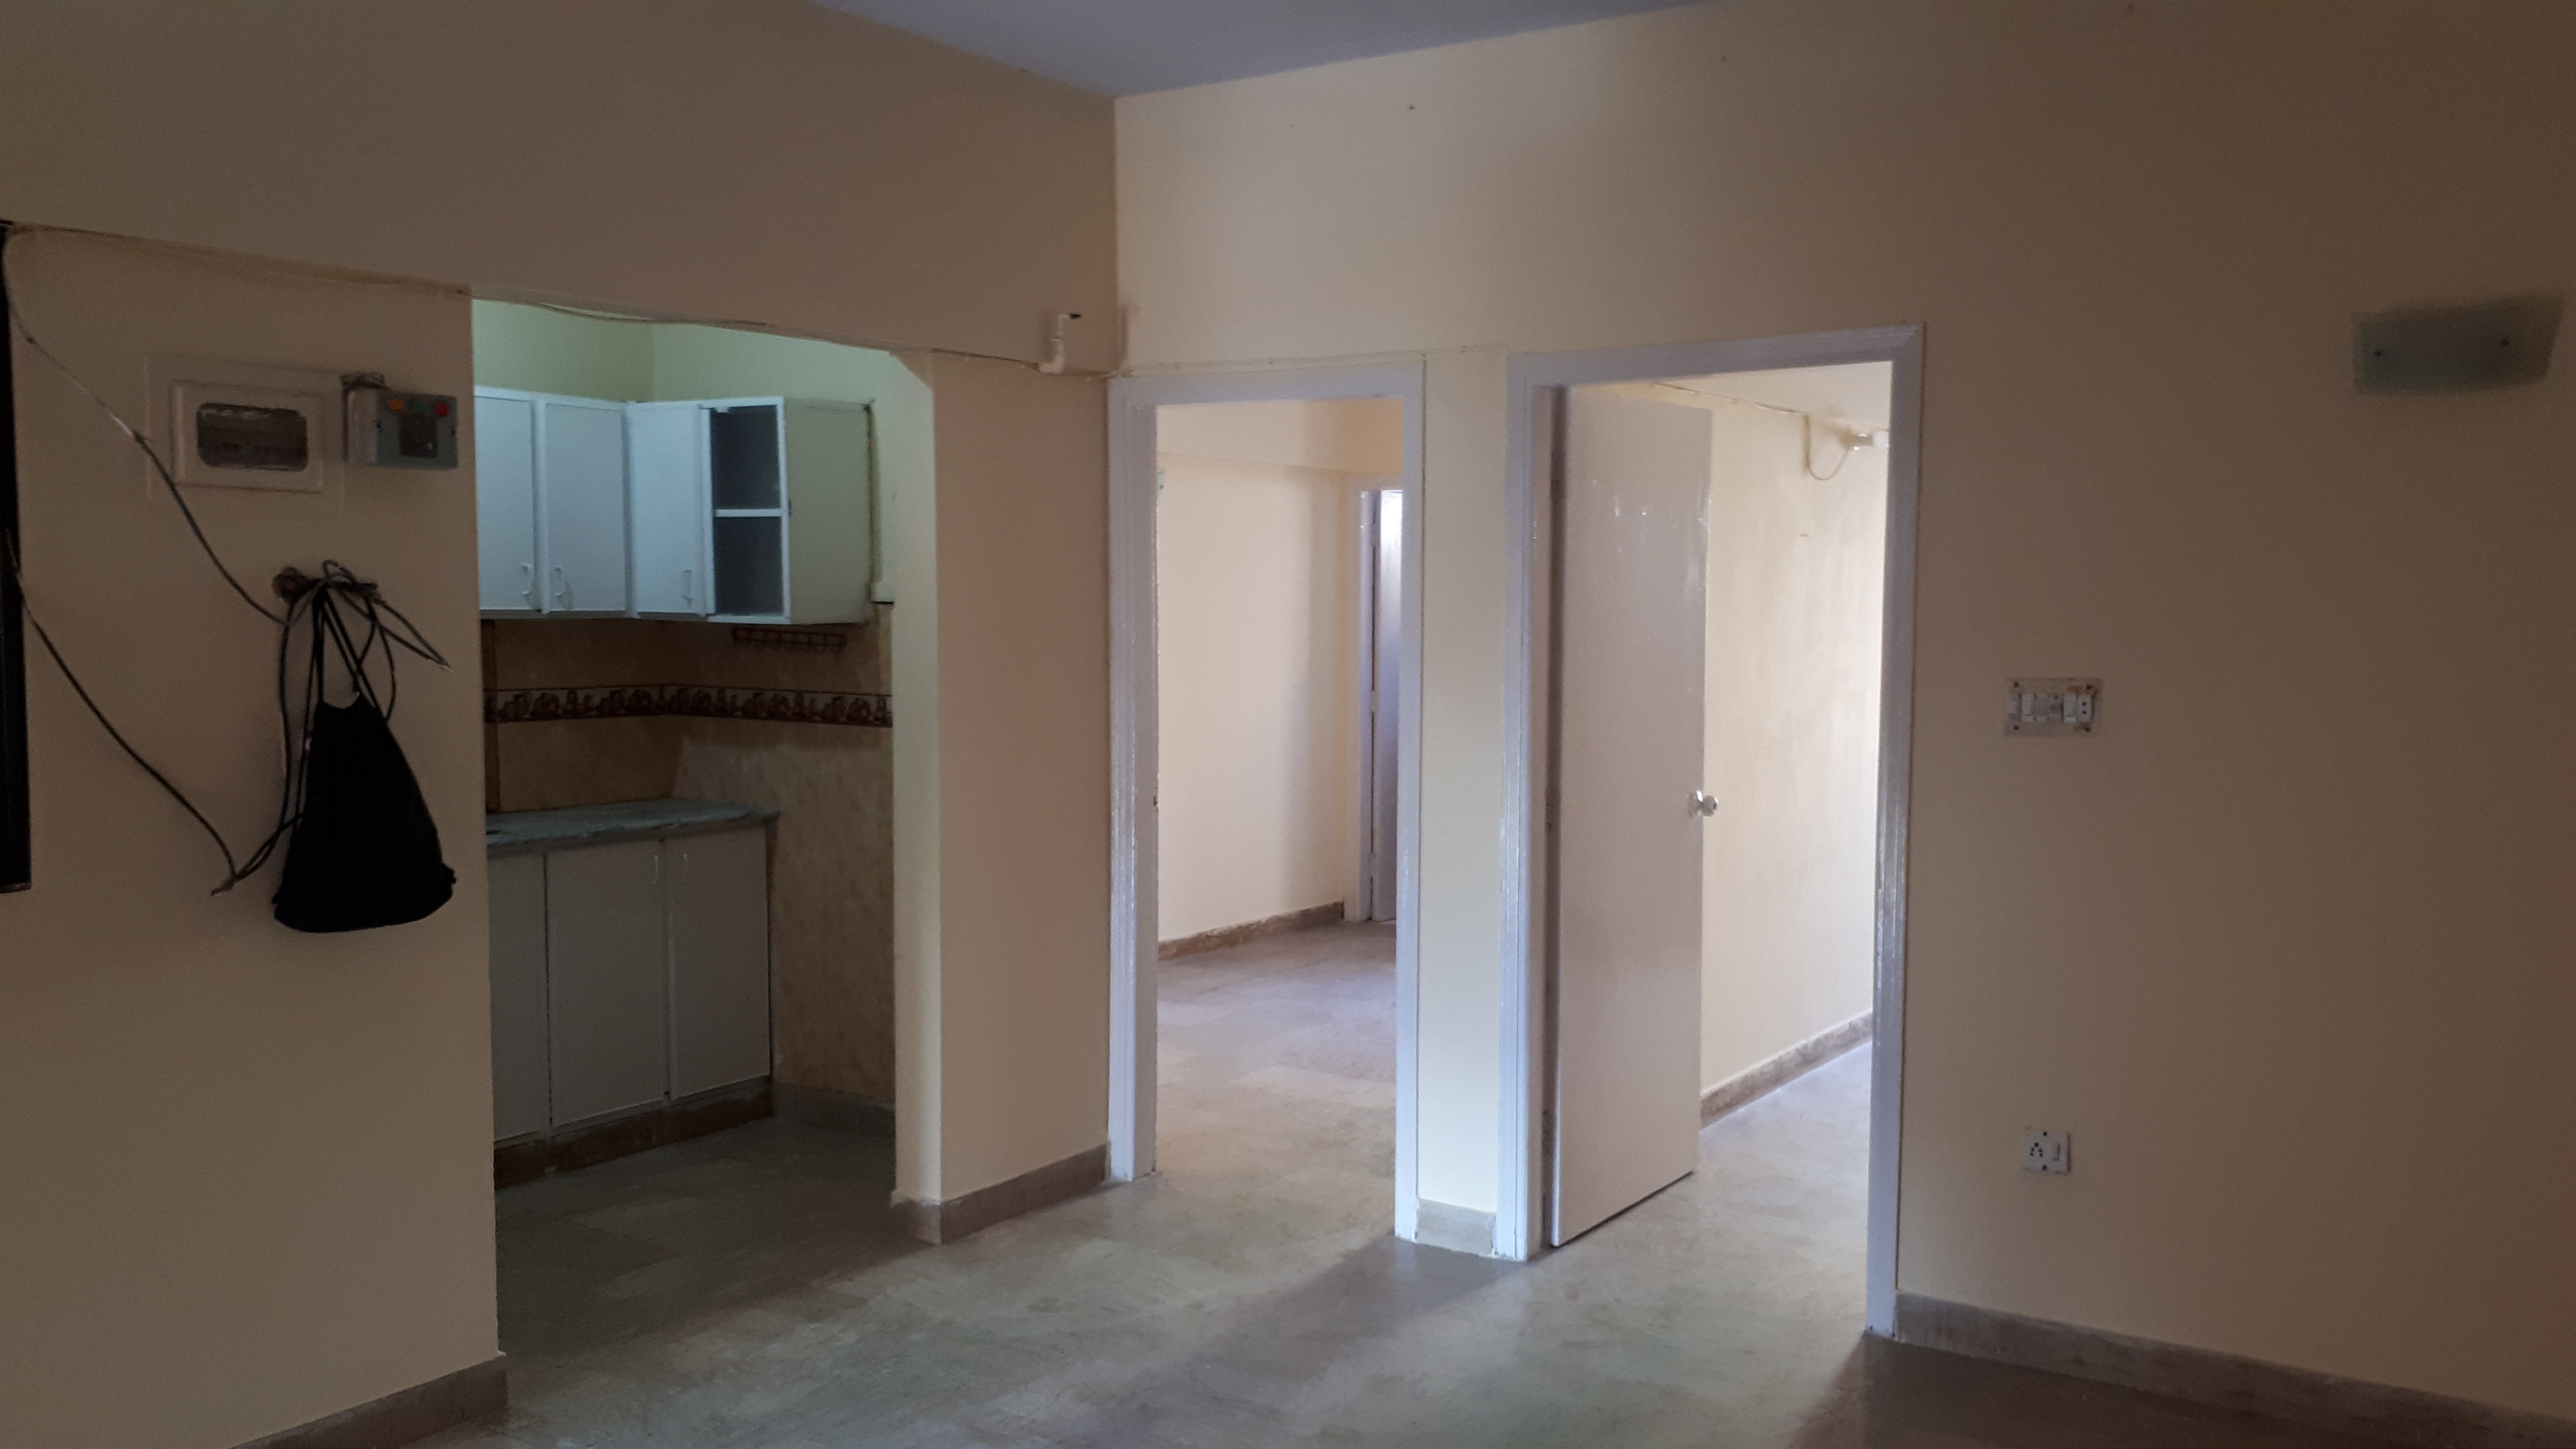 Defence phase 5 Khadda 2 bed lounge attach bathroom family building  for executive lady or family newly renovated 